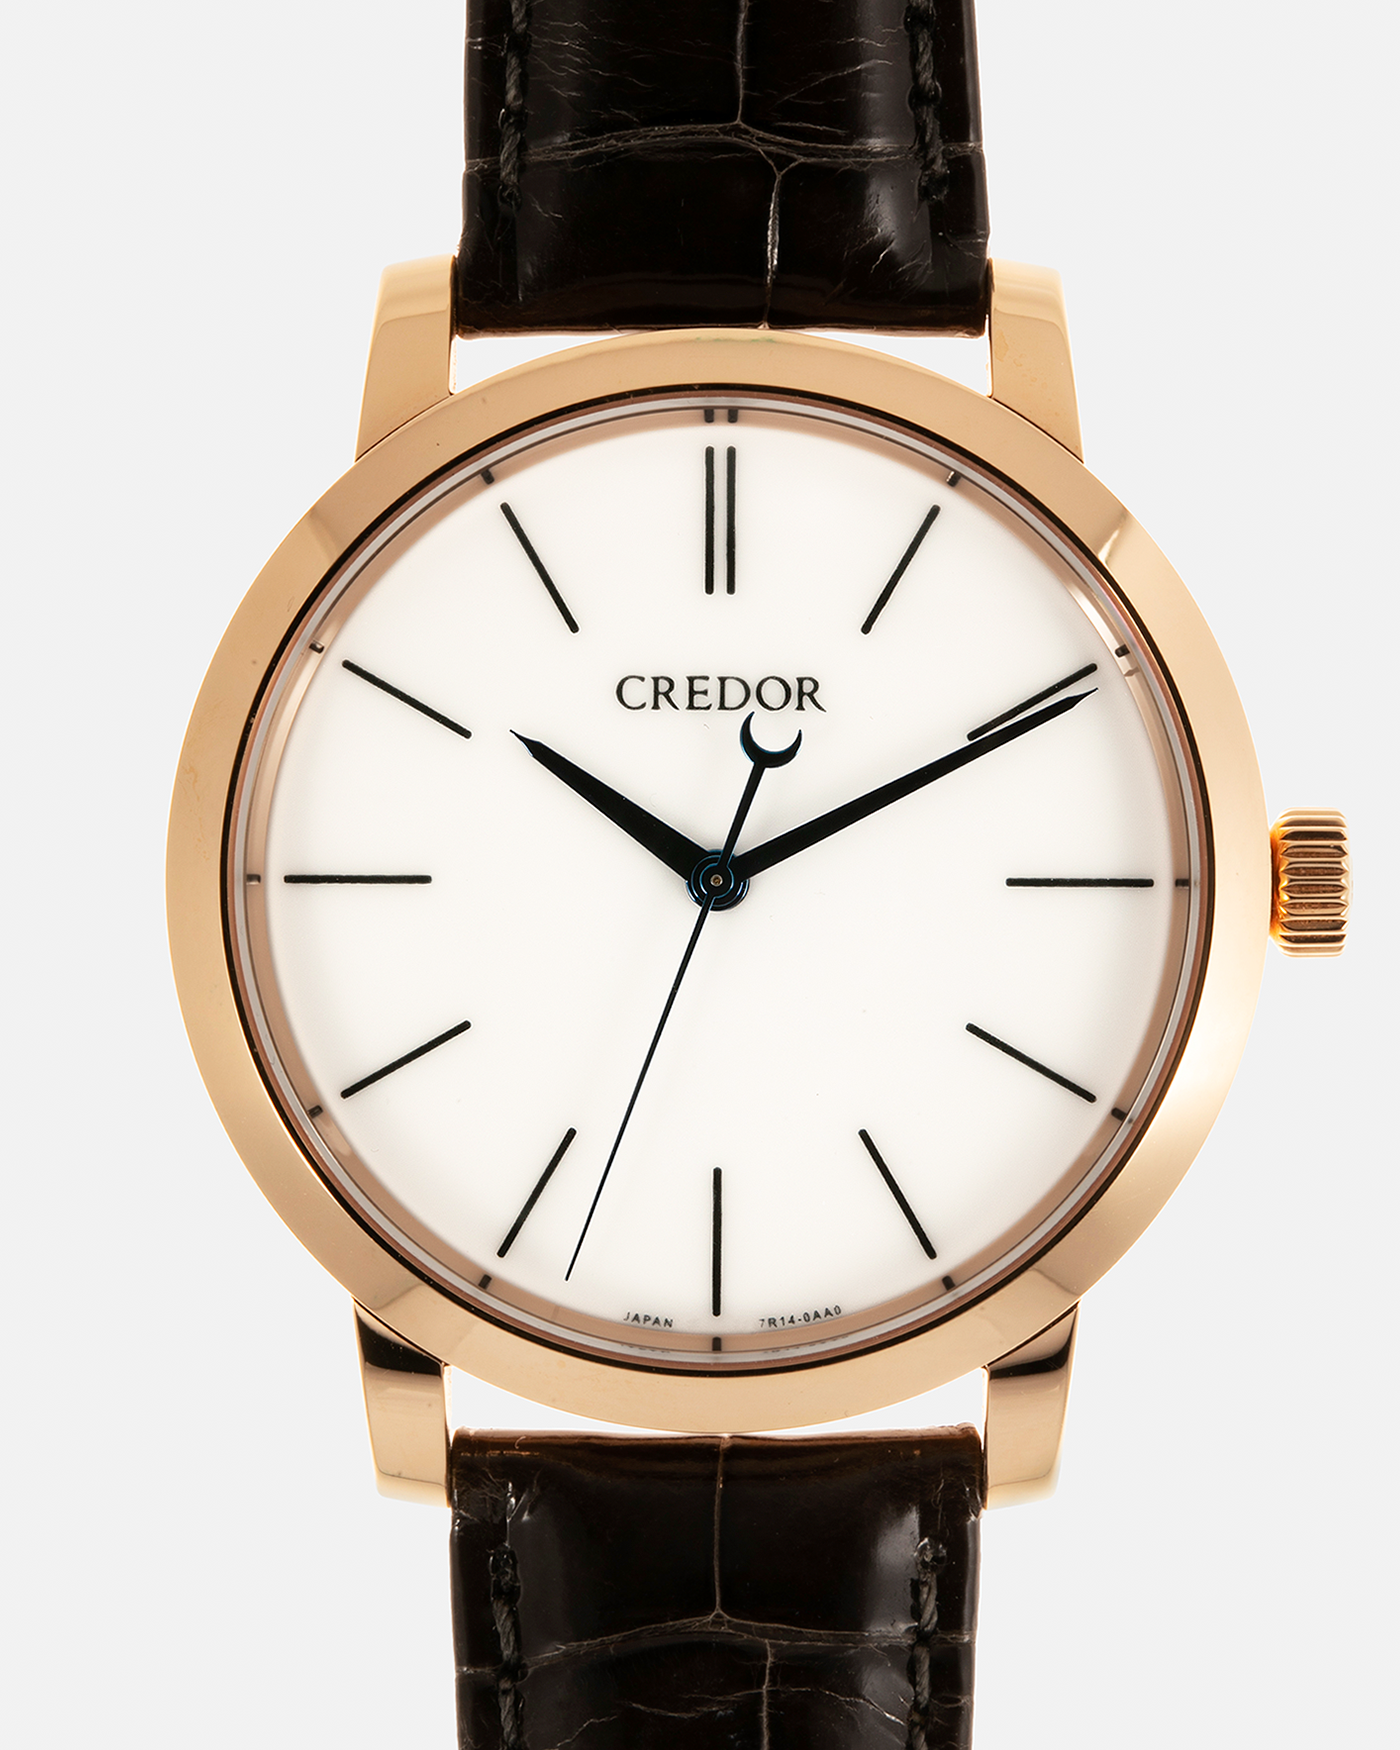 Brand: Credor Year: 2019 Model: Eichi II Reference Number: GBLT998 Material: 18-carat Rose Gold Movement: Credor Cal. 7R14A 1 Spring Drive, Manual-Winding Case Dimensions: 39mm x 10.3mm Strap: 19mm Strap: Credor Black Alligator Leather Strap with Signed 18-carat Rose Gold Deployant Buckle